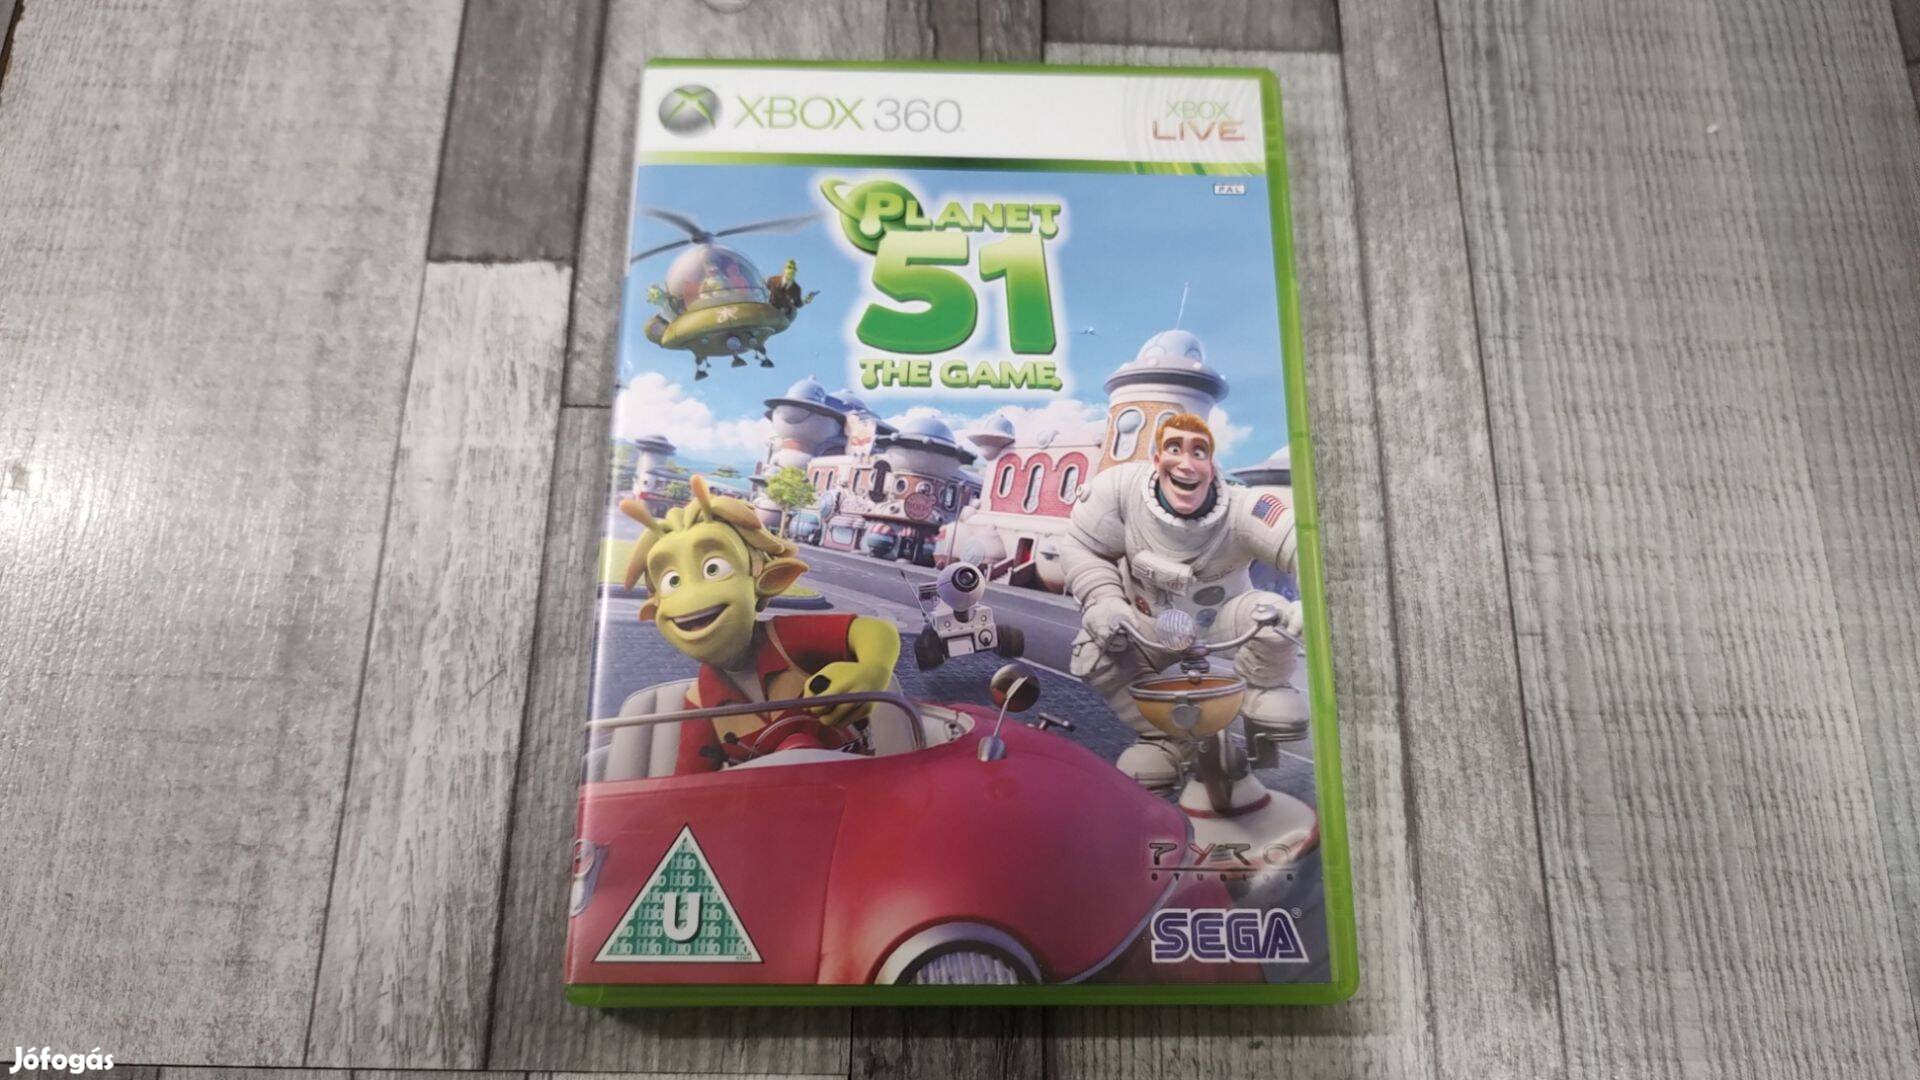 Top Xbox 360 : Planet 51 The Game - Ritka !